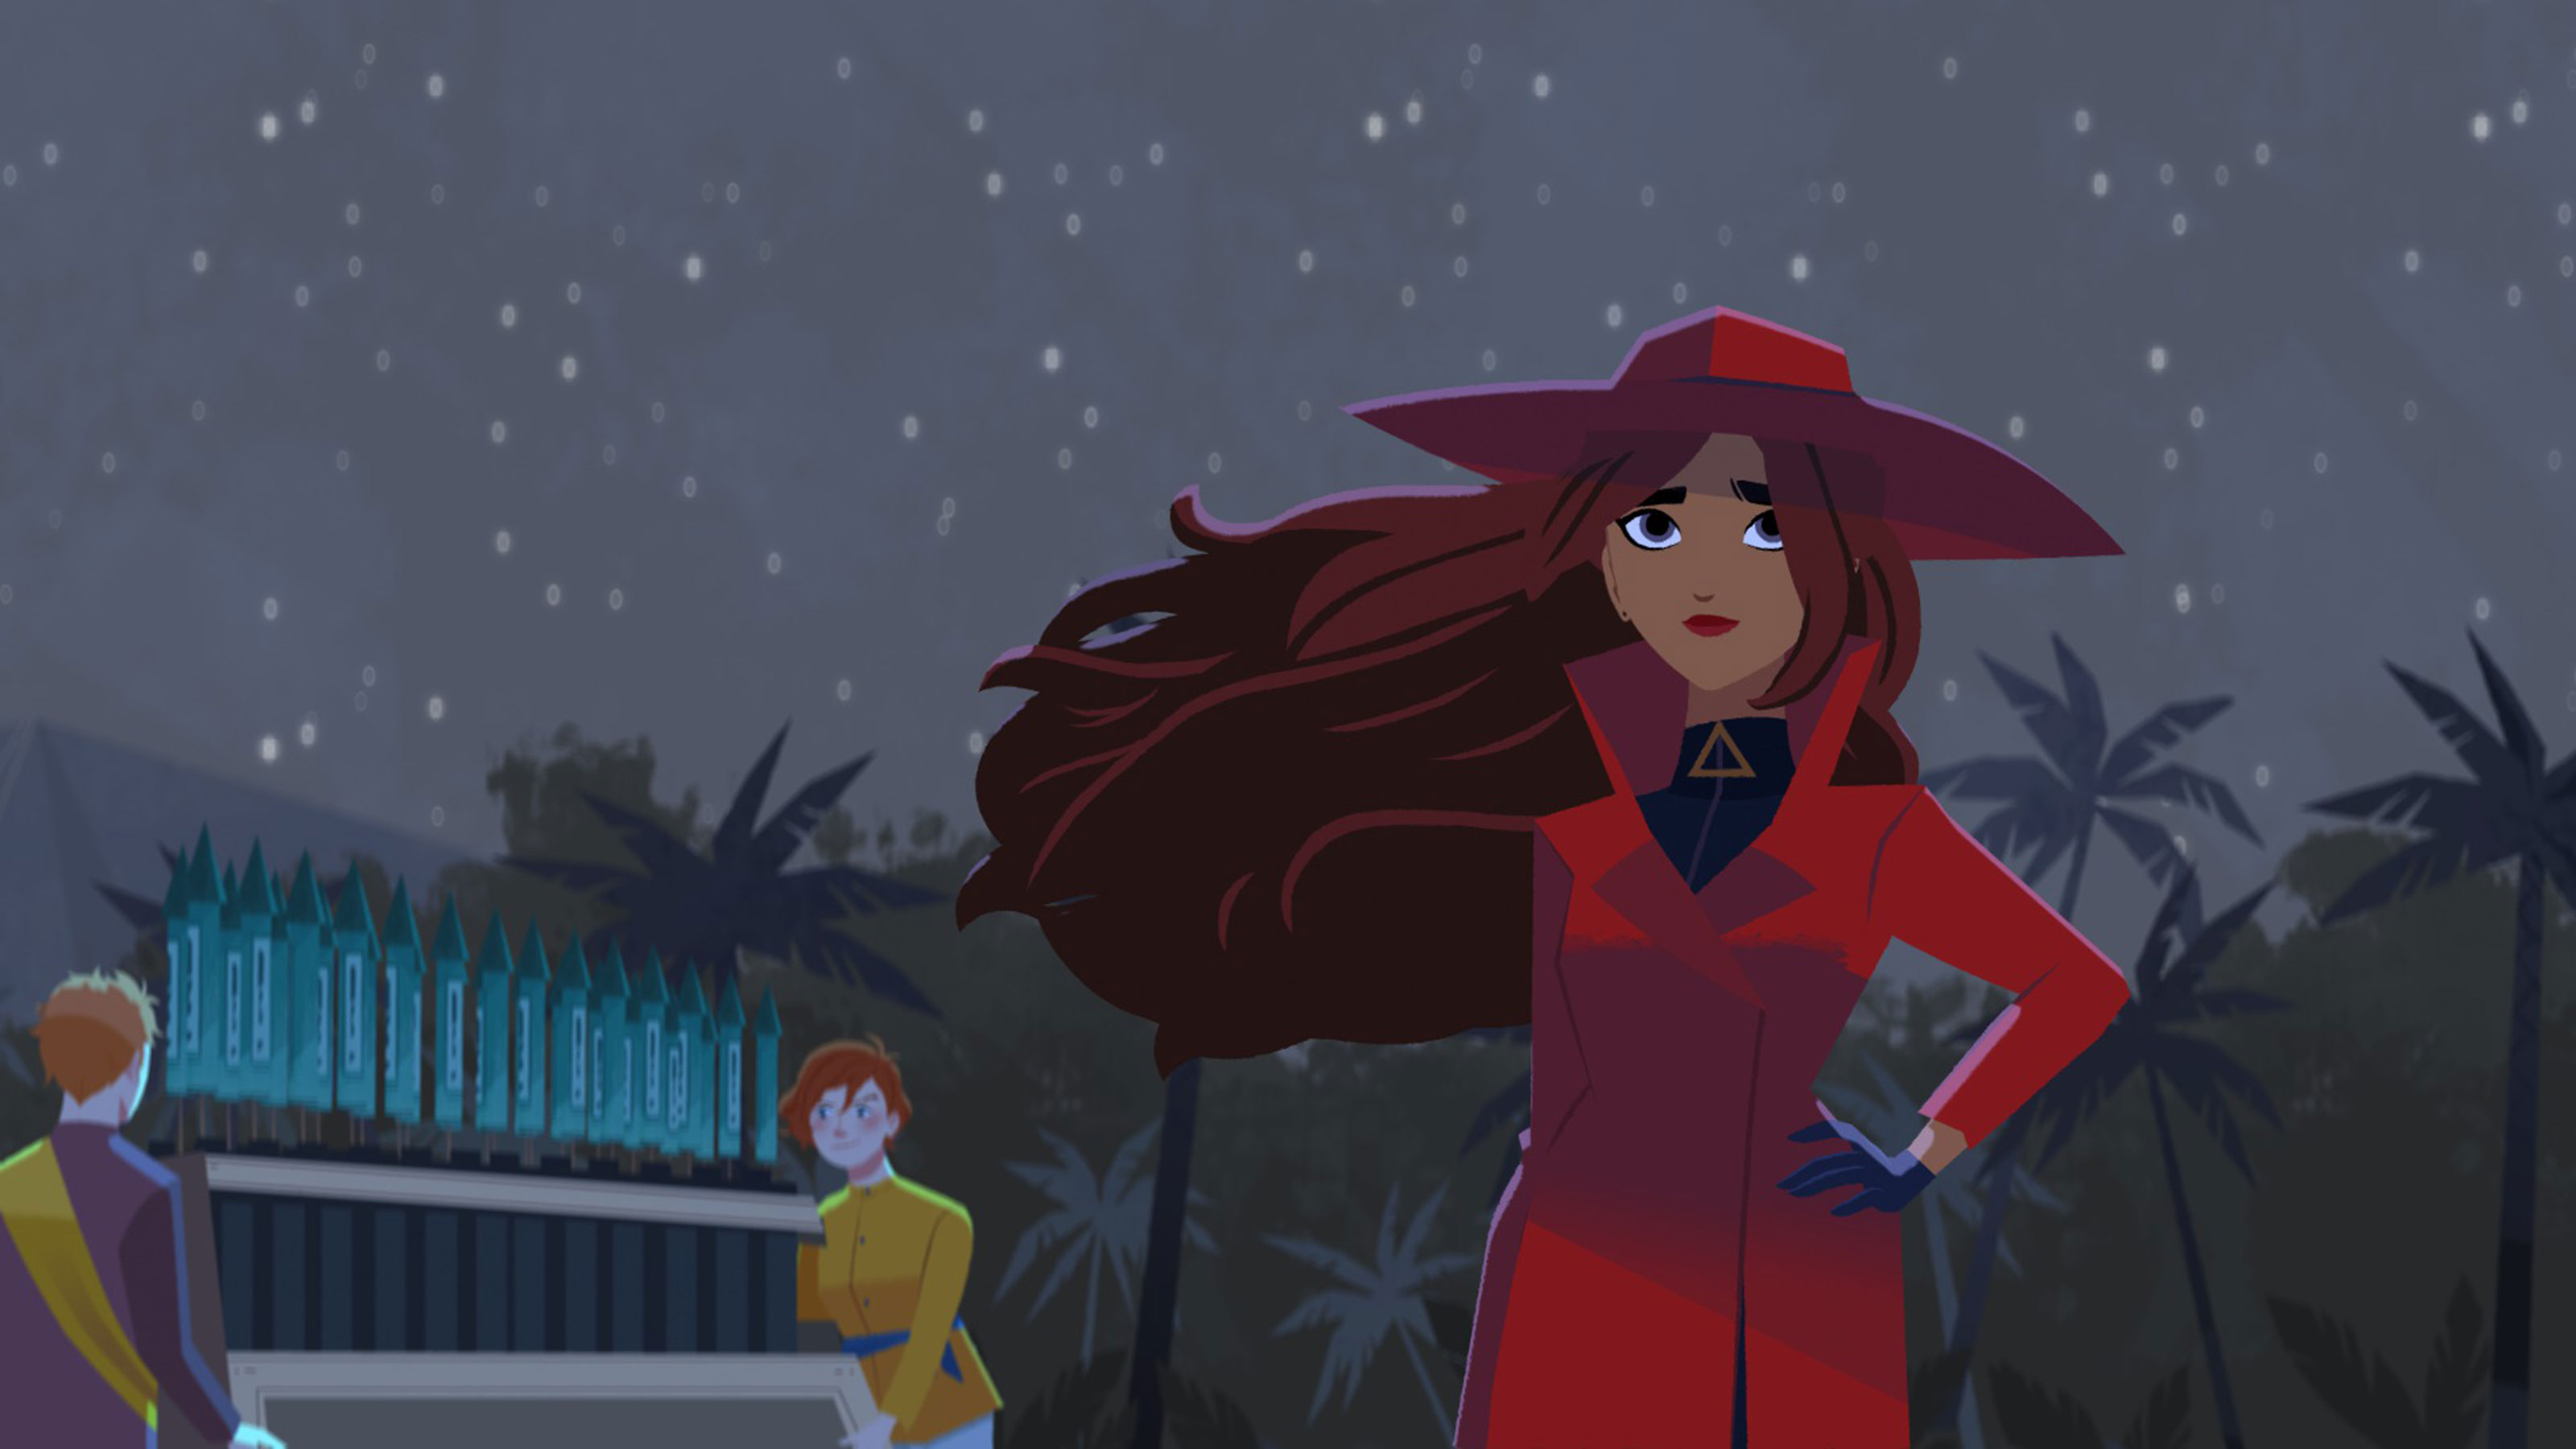 Gina Rodriguez stars as Carmen Sandiego in Netflix's upcoming animated series.